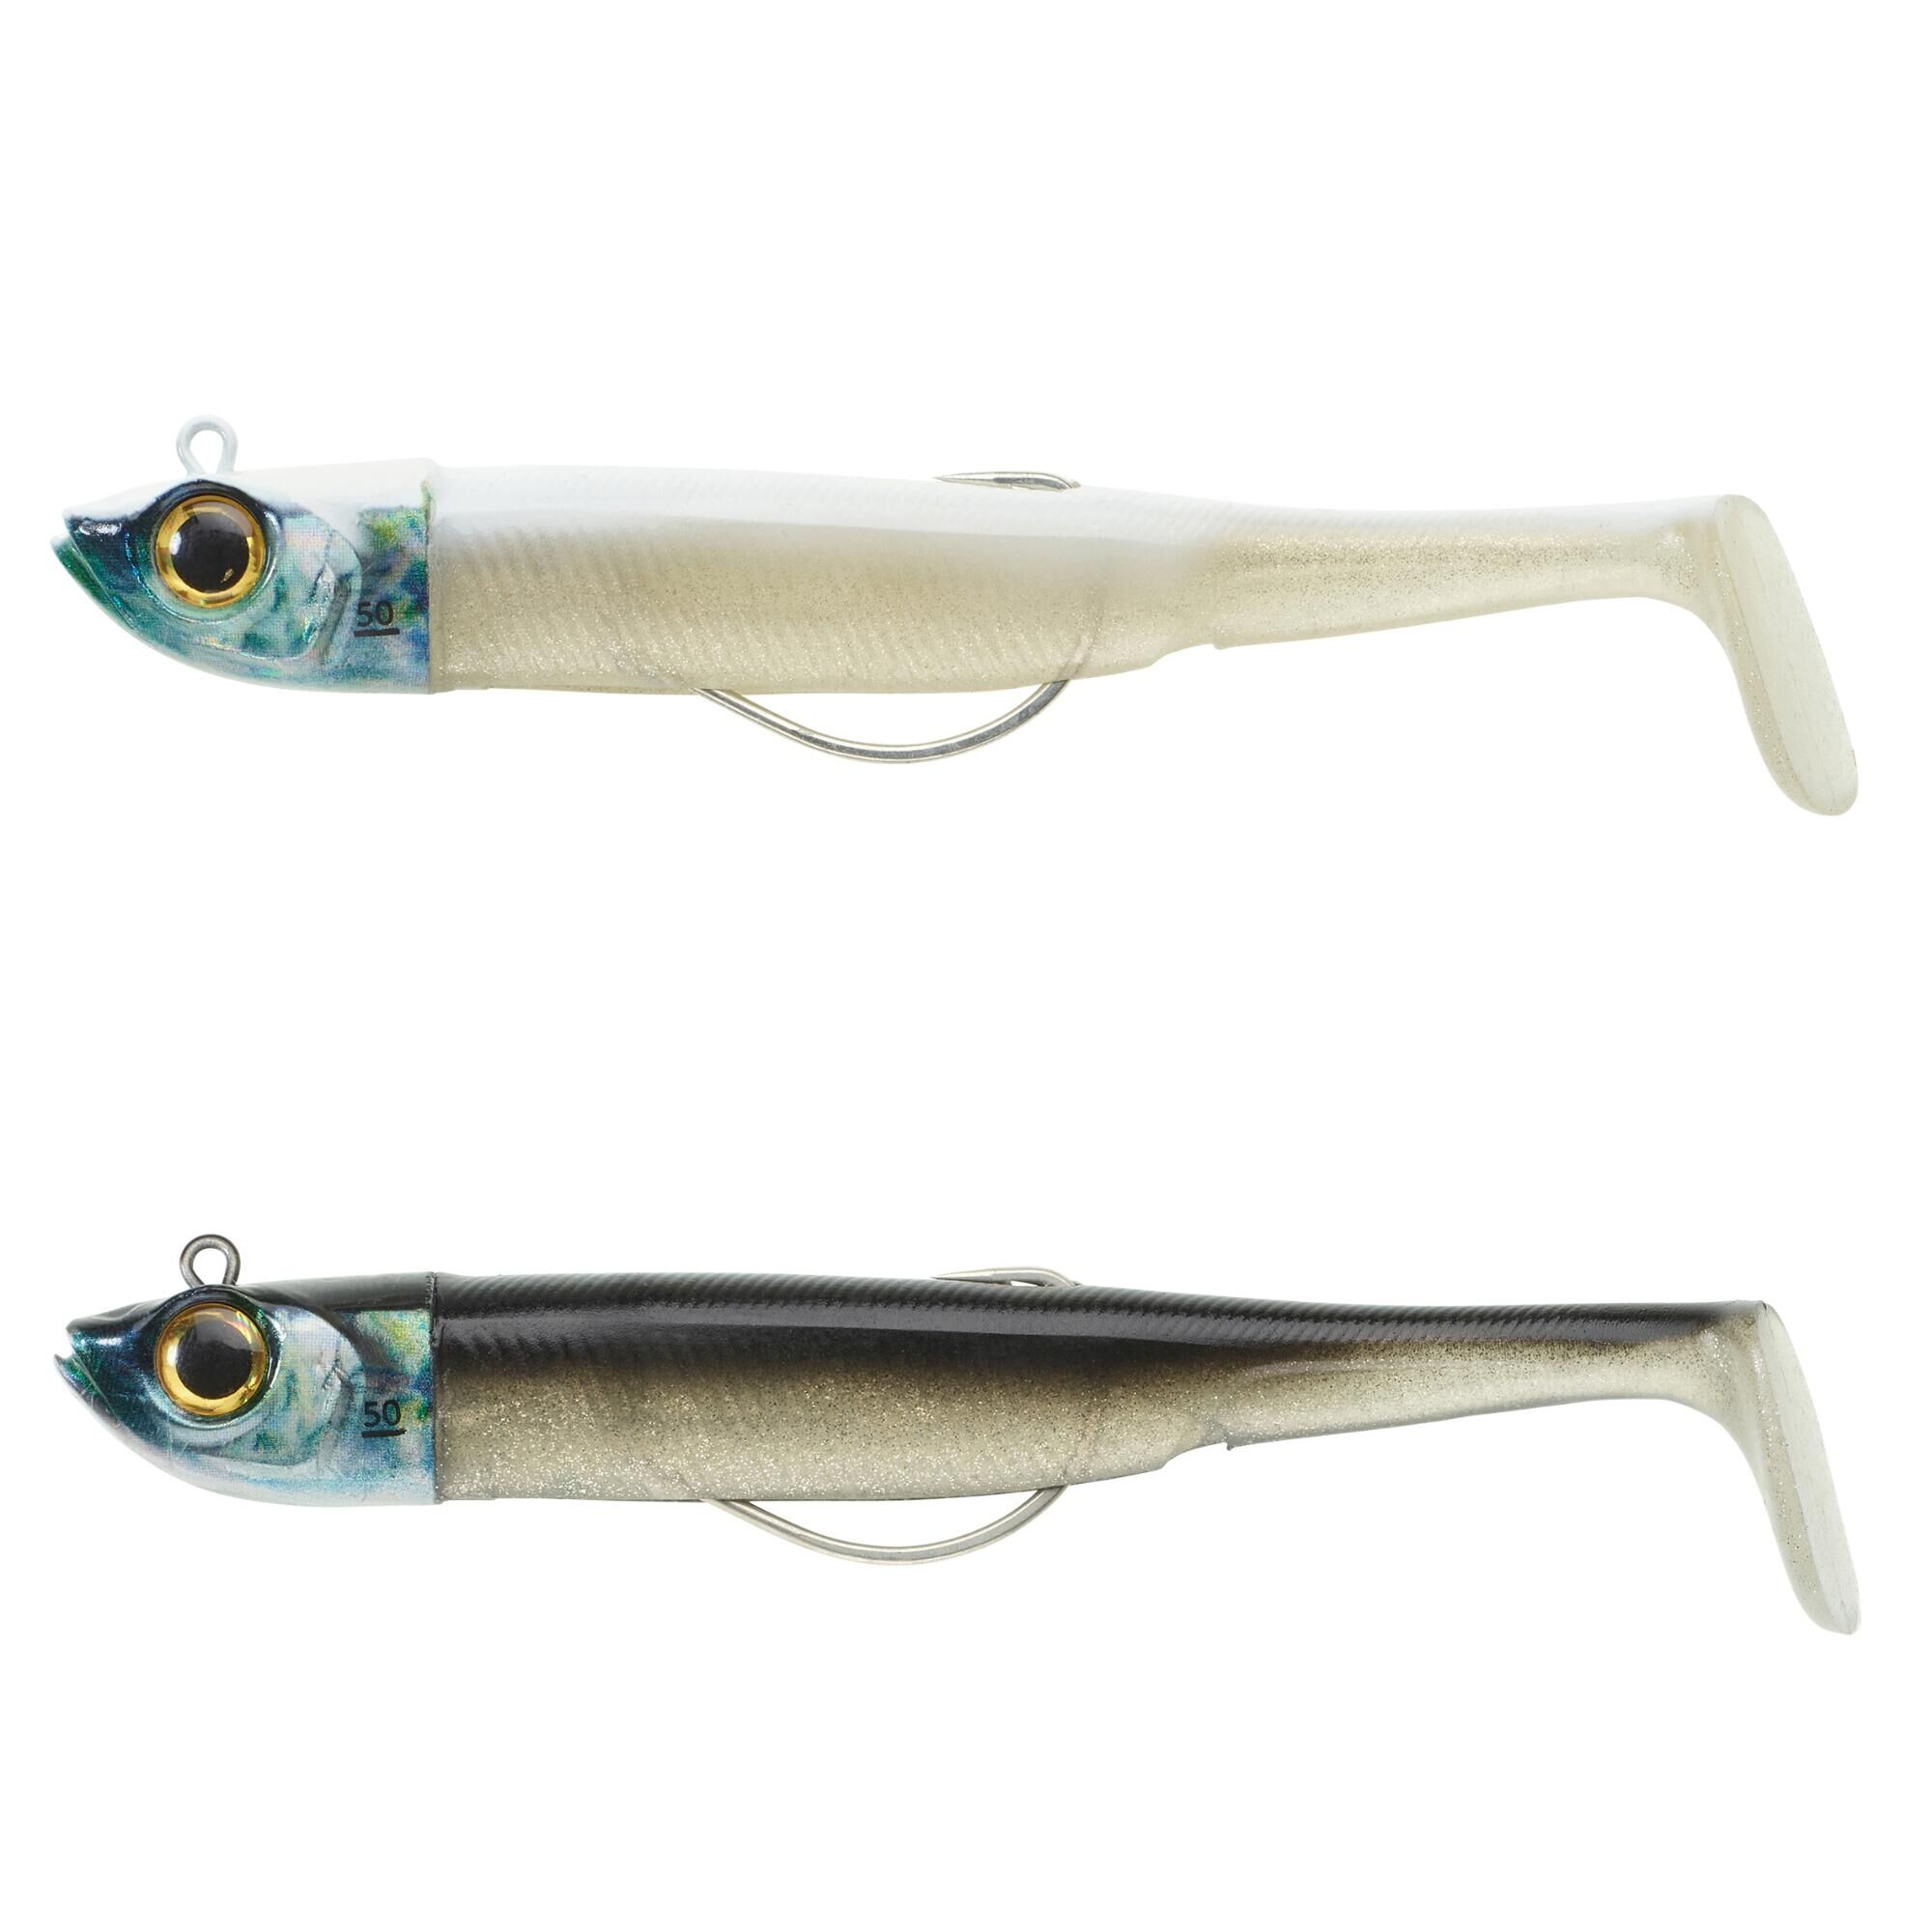 CAPERLAN Sea fishing soft lures shad Texan anchovy ANCHO COMBO 120 50g Black/White back